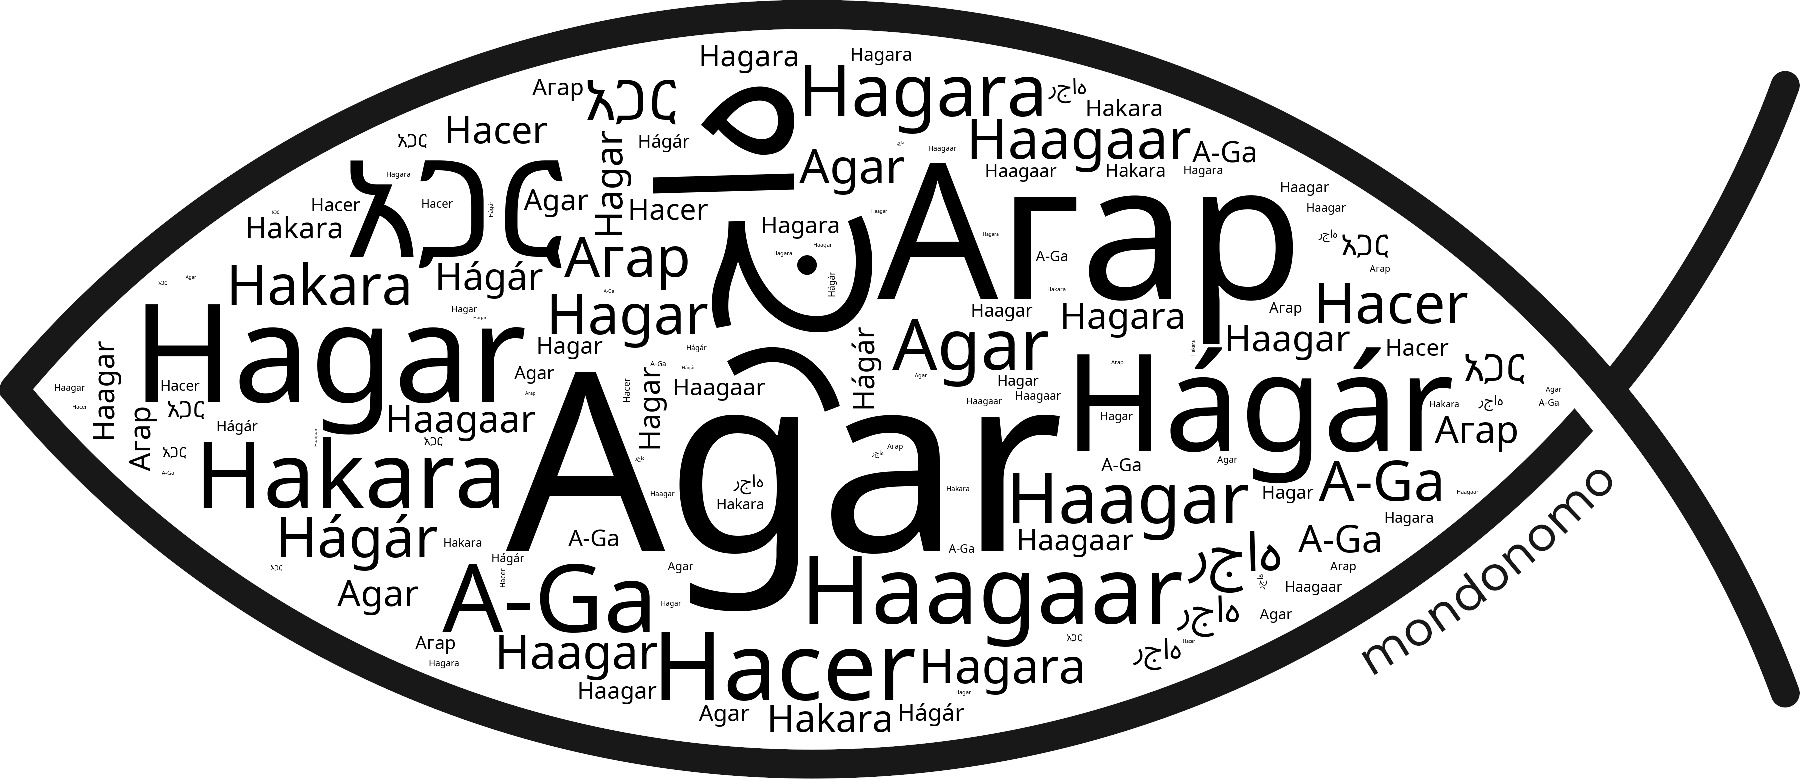 Name Agar in the world's Bibles